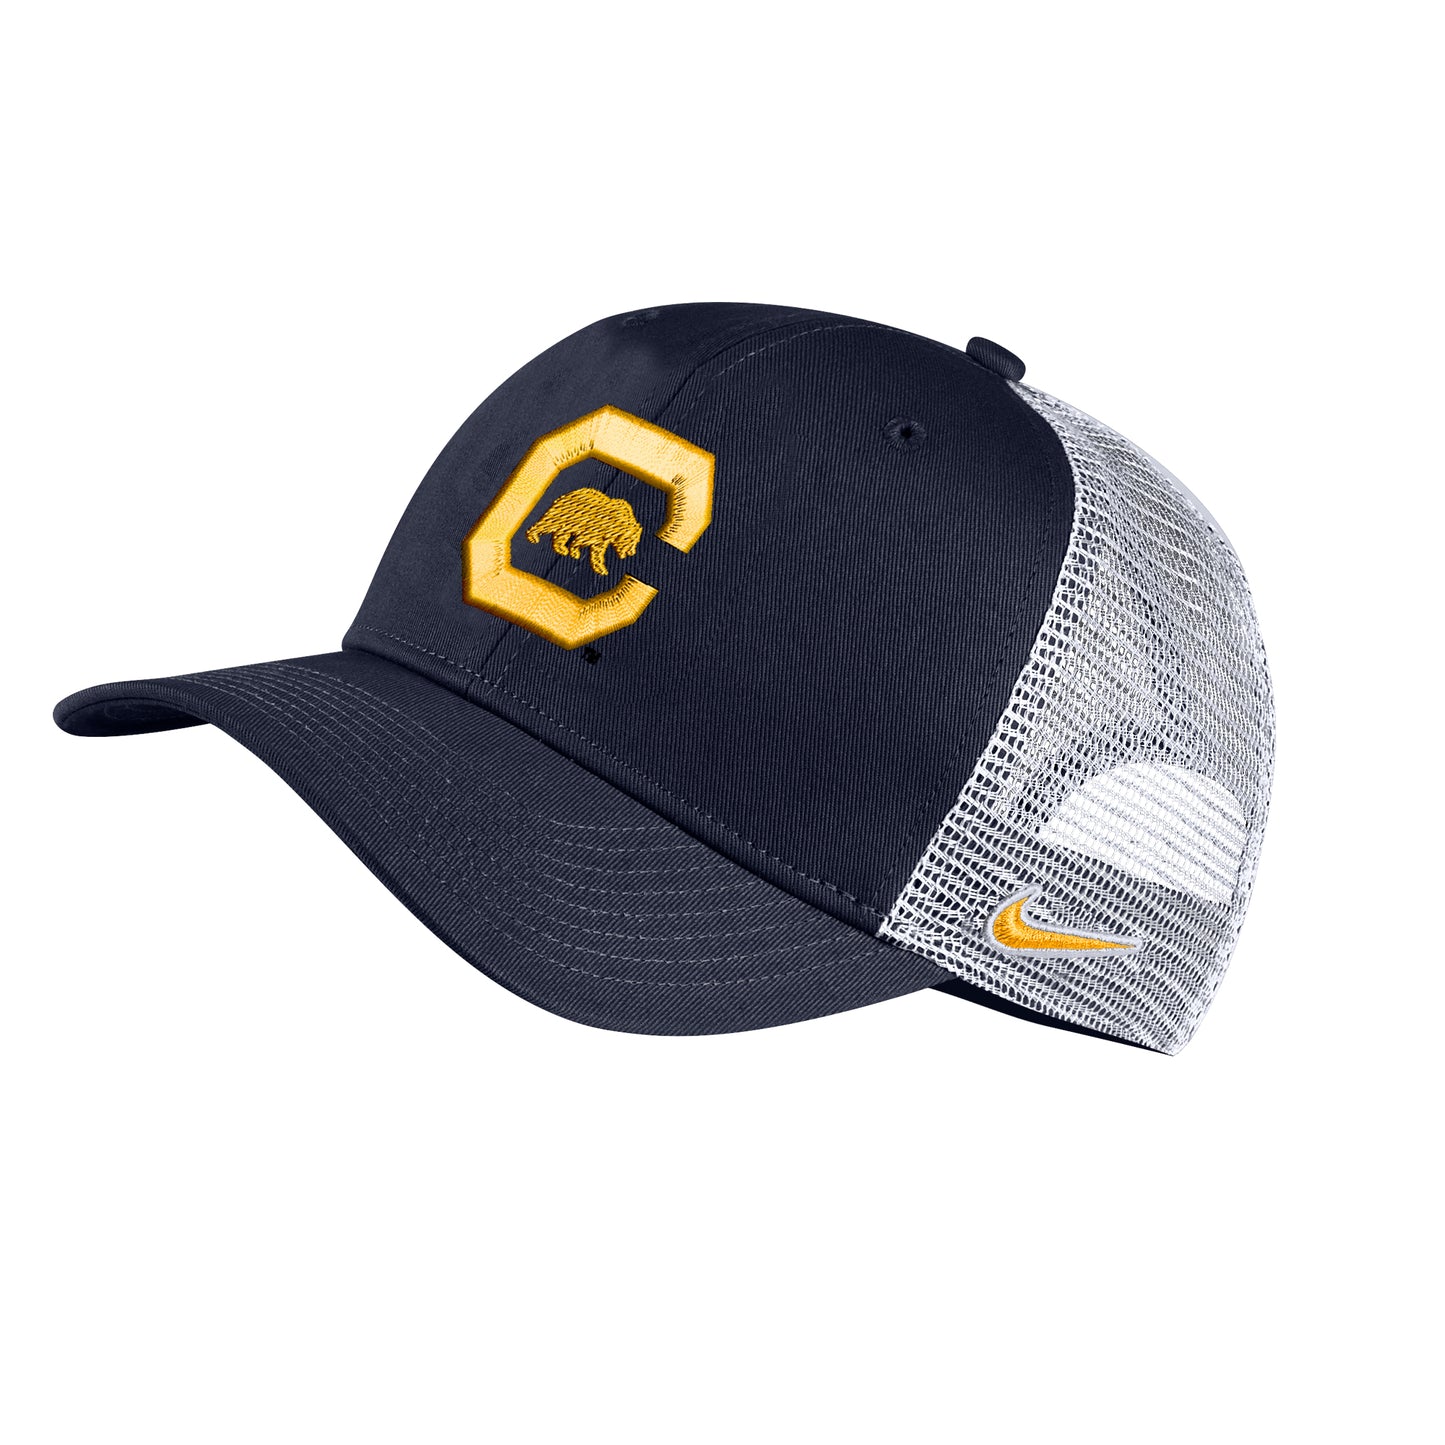 U.C. Berkeley Cal embroidered Nike trucker mesh hat with C block and Bear logo-Navy-Shop College Wear